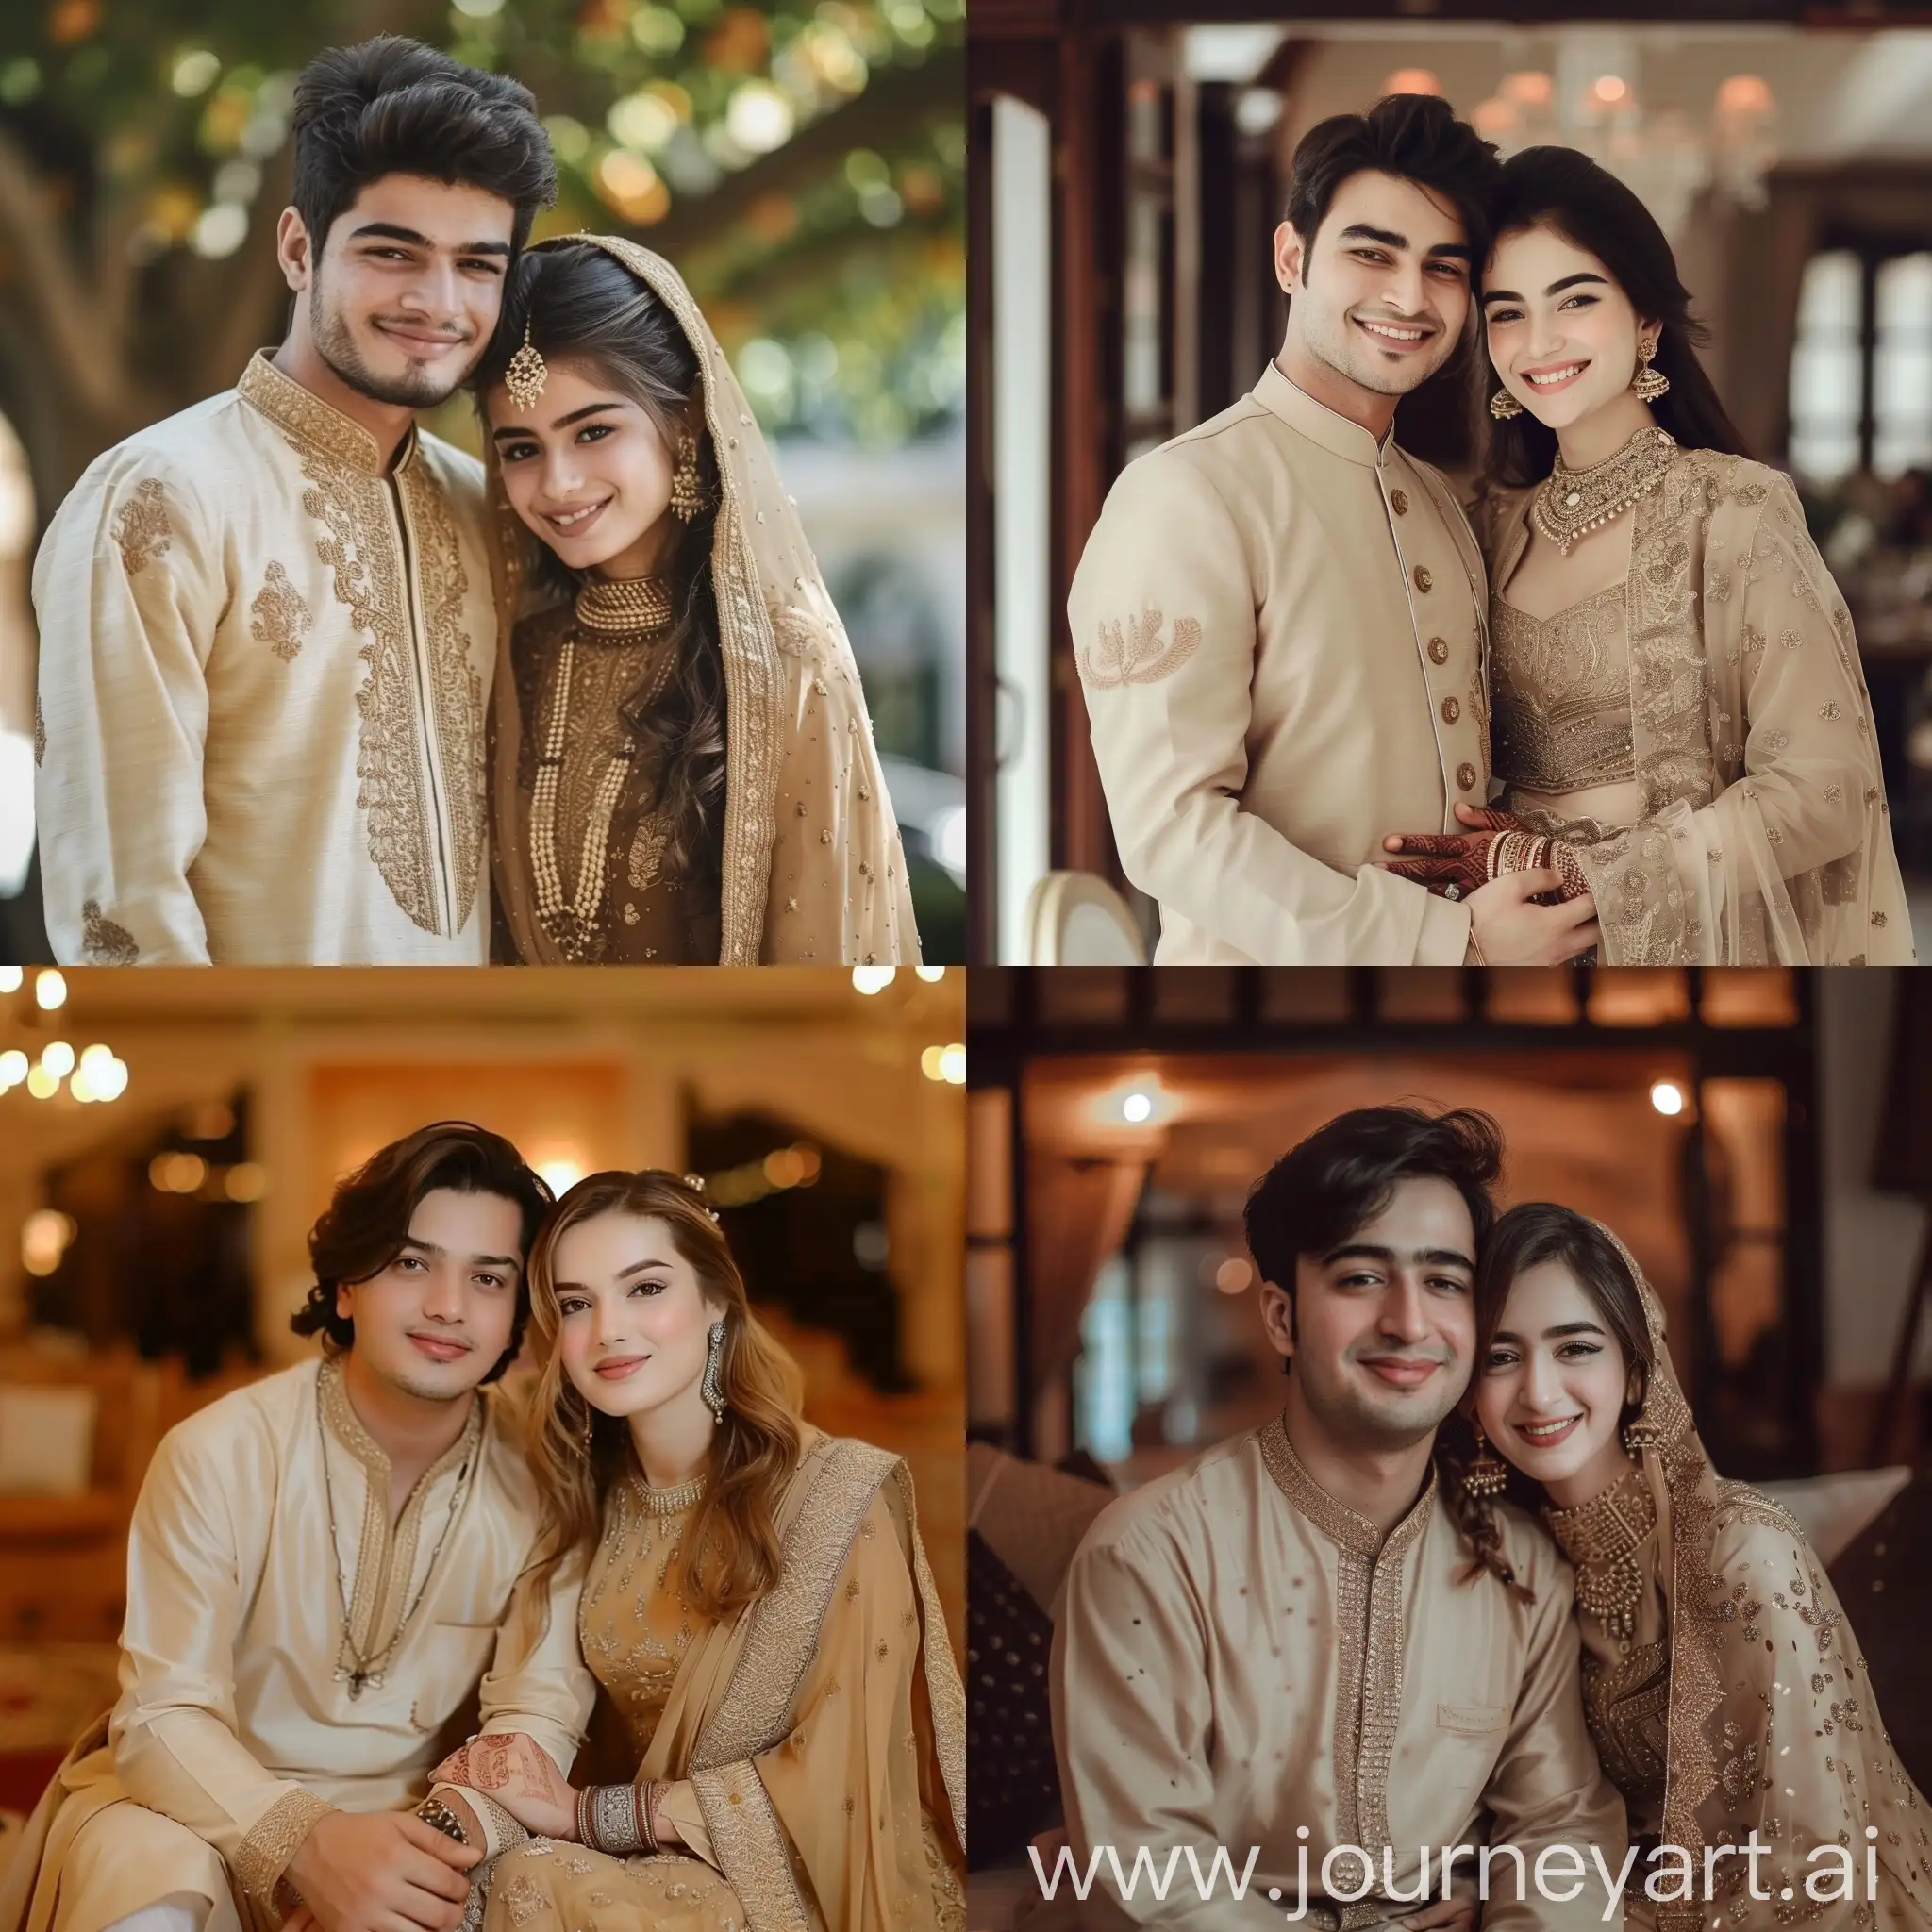 Generate couple image the boy name is M.Hanif Noor and girl name is Shaista